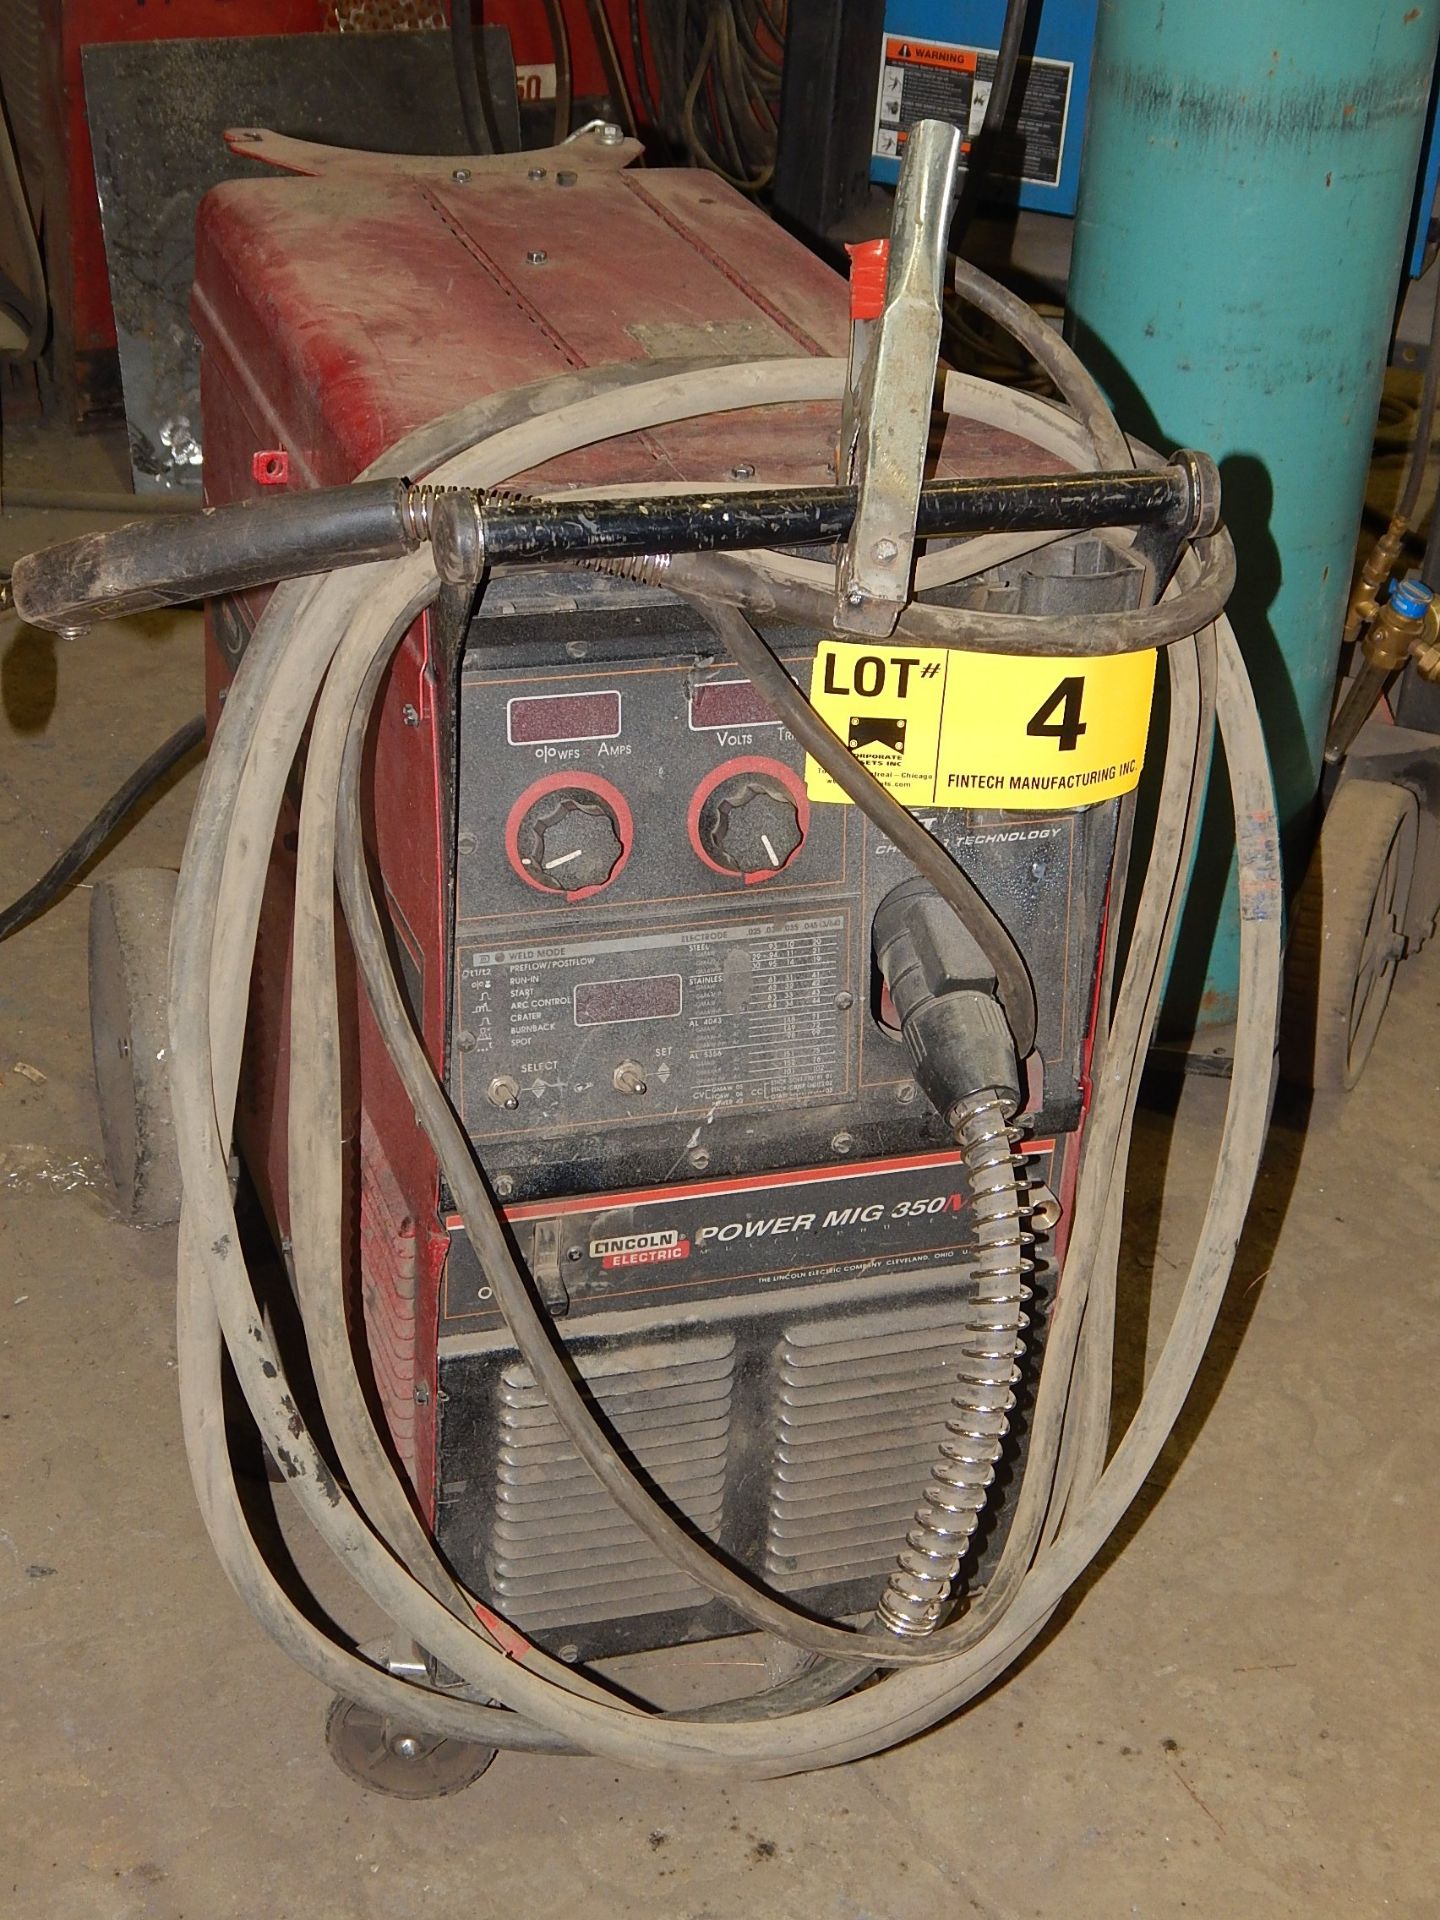 LINCOLN ELECTRIC POWER MIG 350MP DIGITAL MIG WELDER WITH CABLES AND GUN S/N: K2403-1